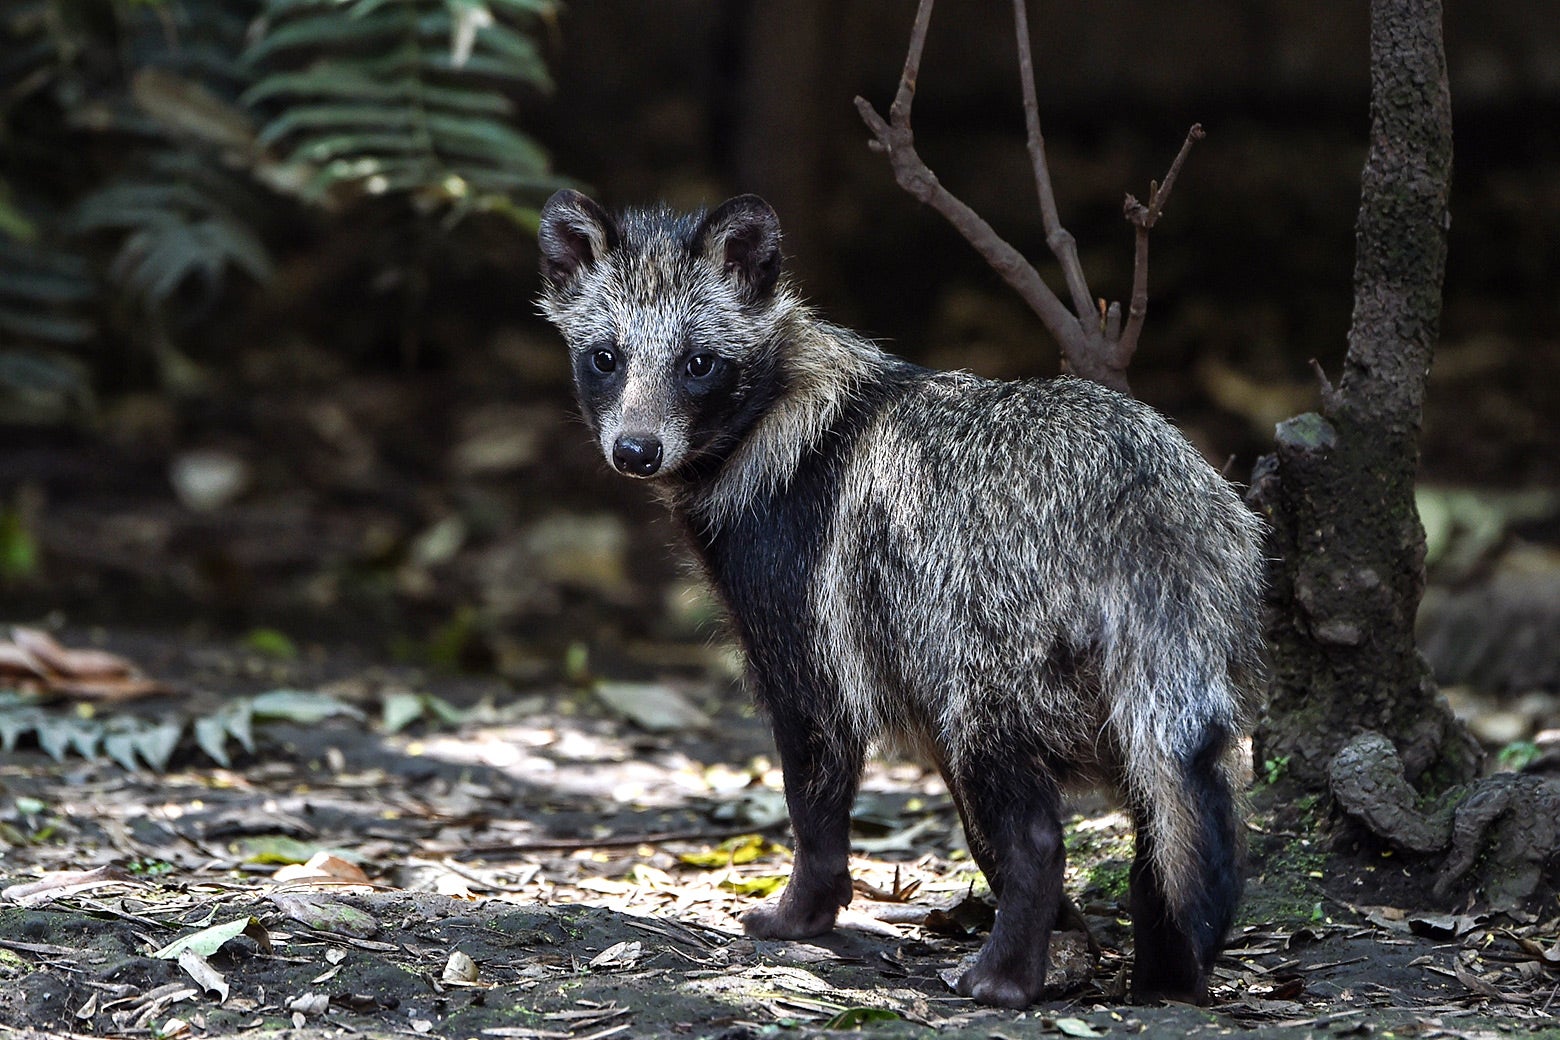 A raccoon dog—an animal that looks like a tall, skinny raccoon—looks back toward the camera while standing on a forest floor.